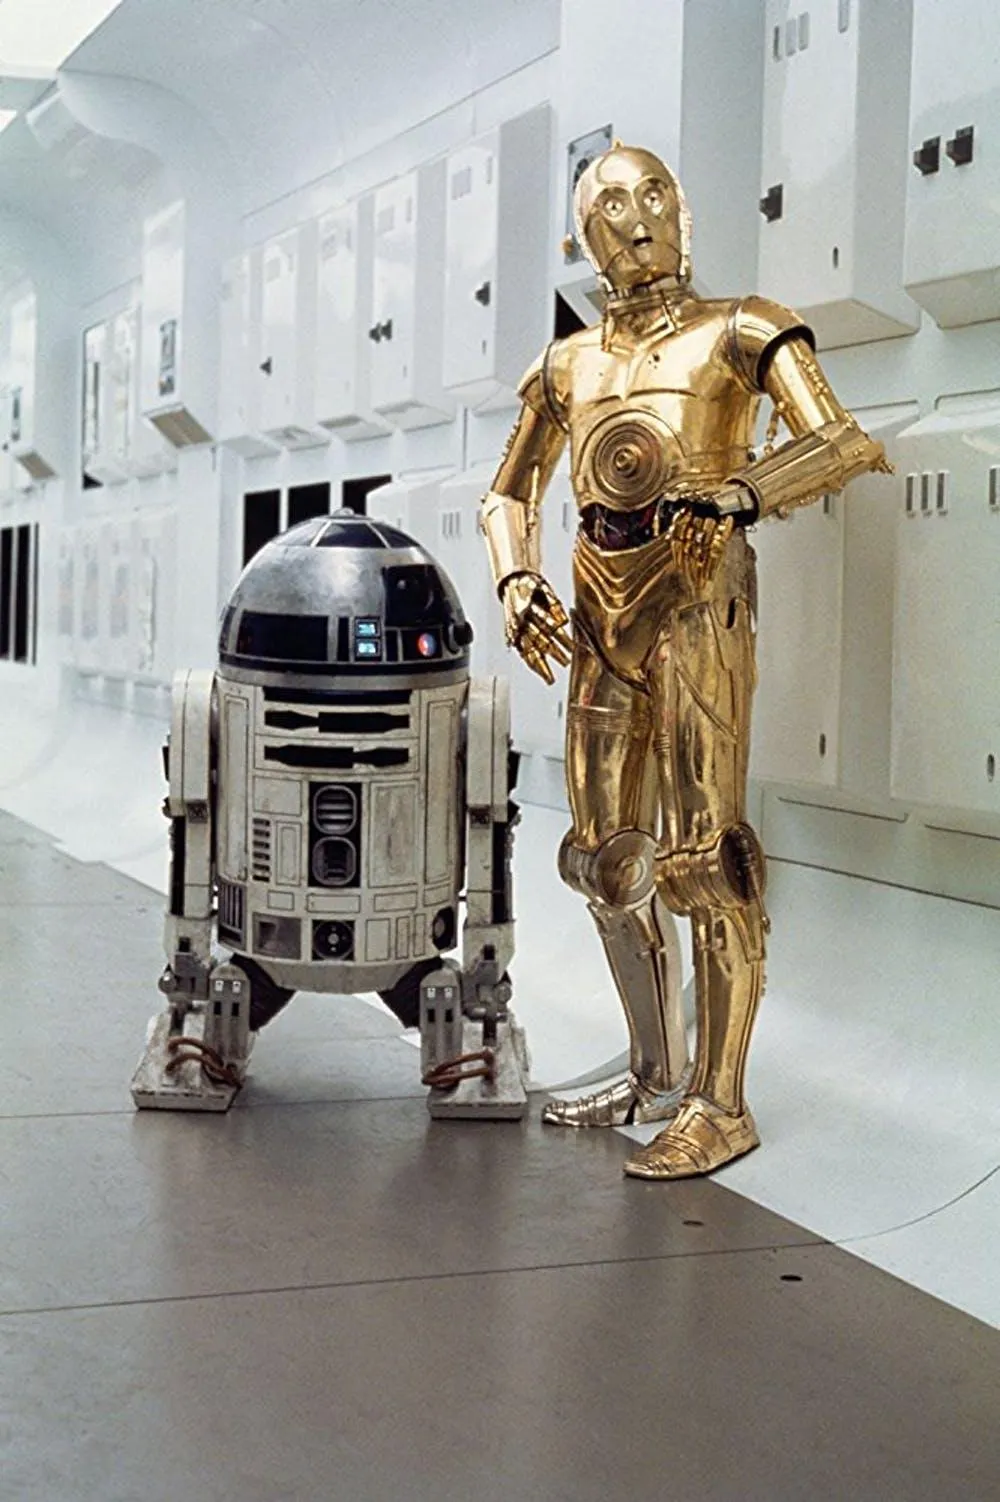 R2-D2 and C3PO in A New Hope